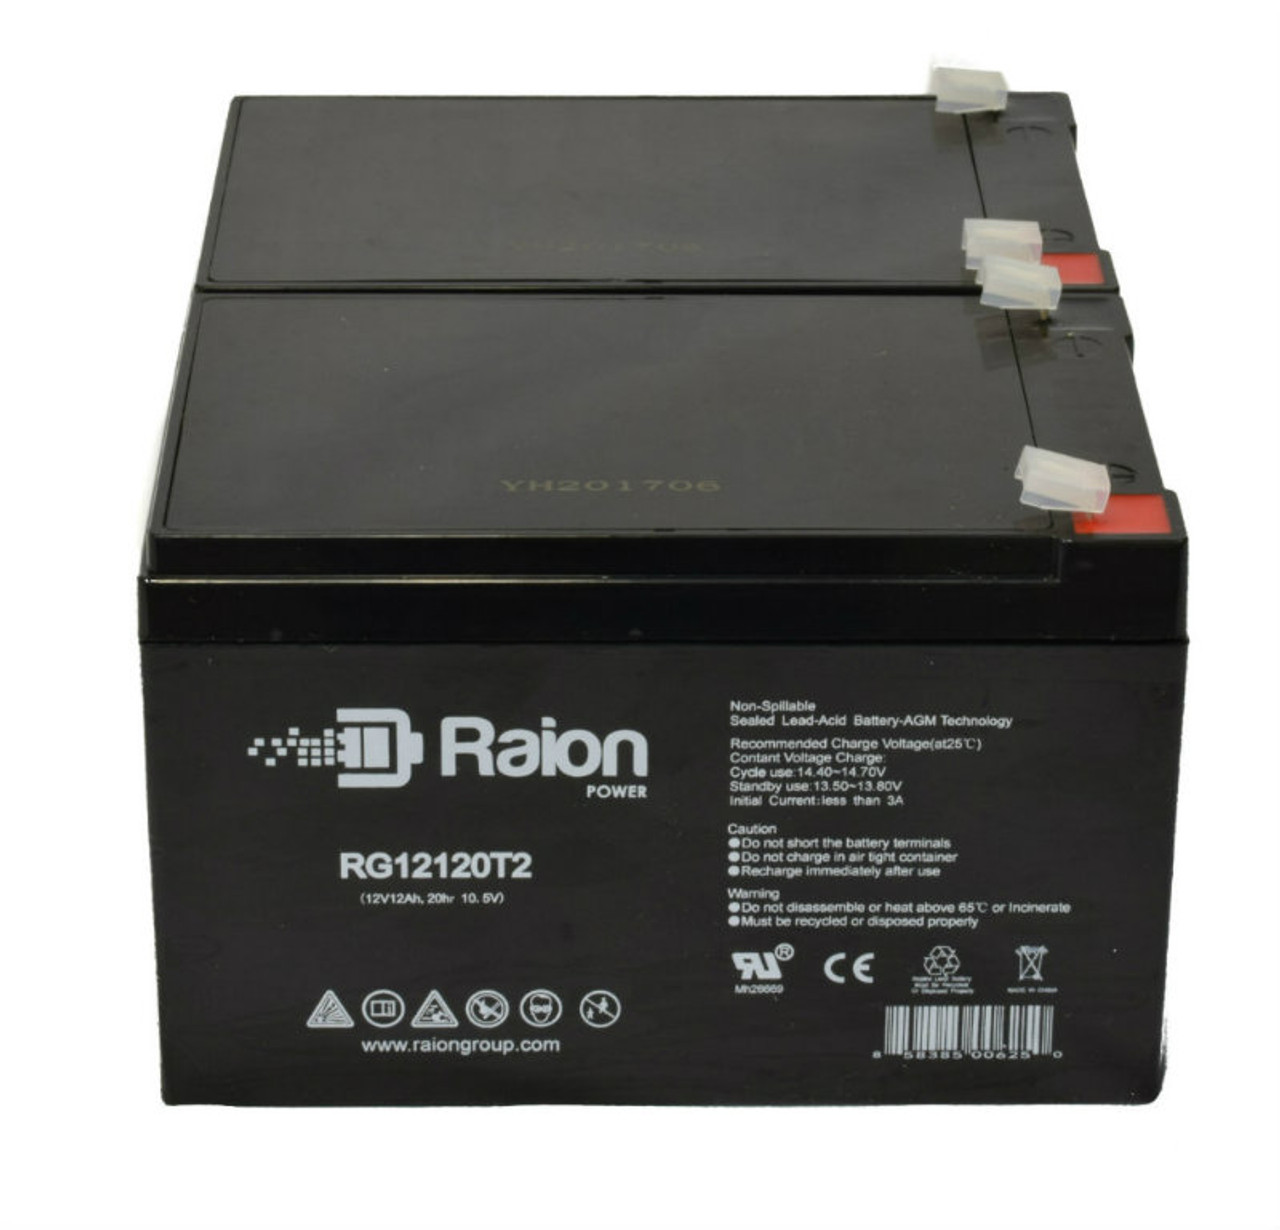 Raion Power 12V 12Ah Non-Spillable Compatible Replacement Battery for National Battery NB12-12 - (2 Pack)